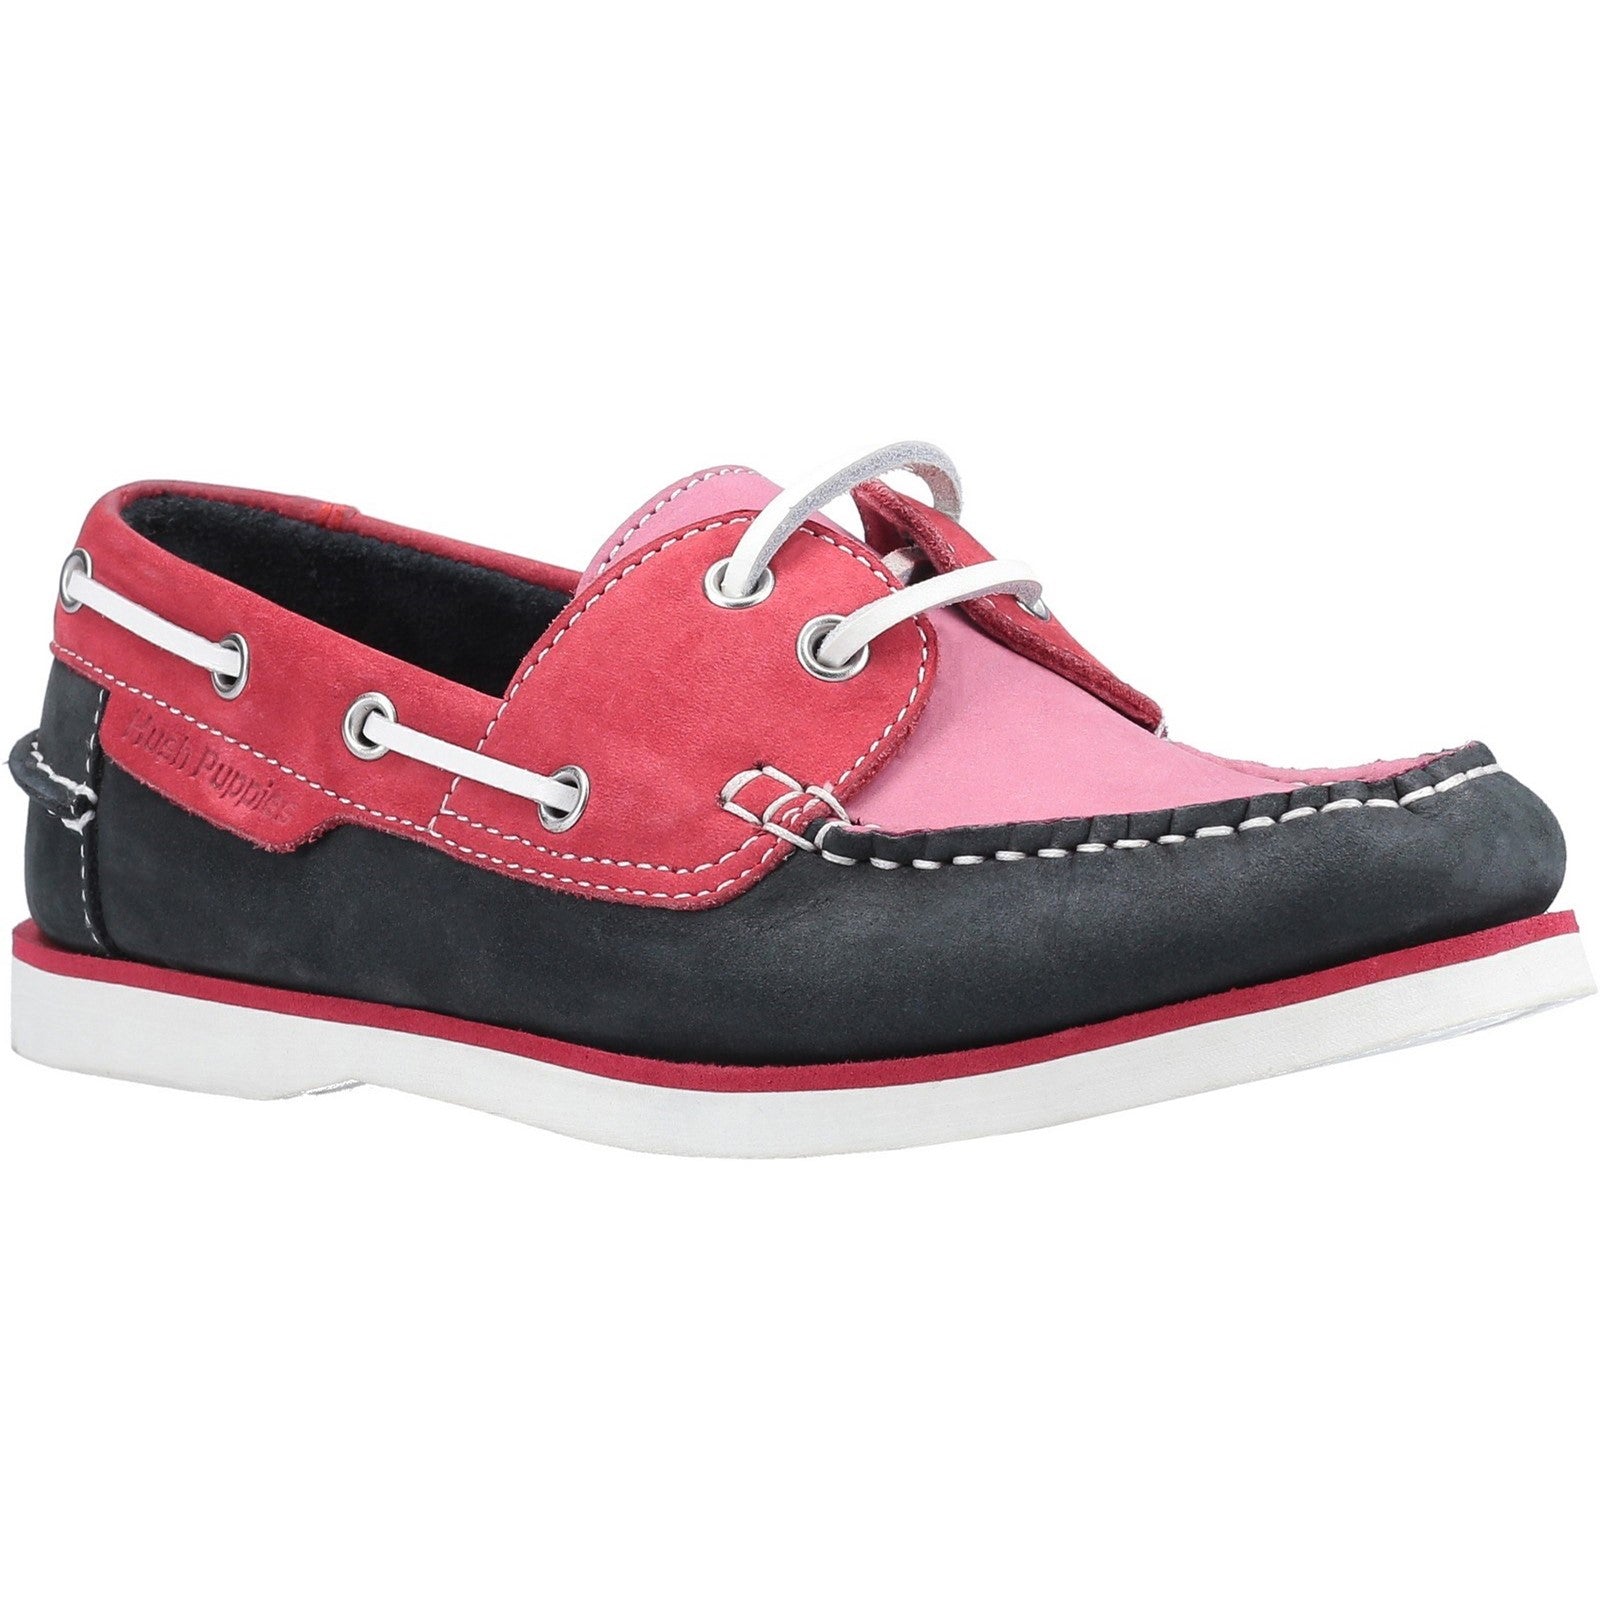 Hush Puppies Hattie Ladies Pink And Navy Leather Lace Up Deck Shoes